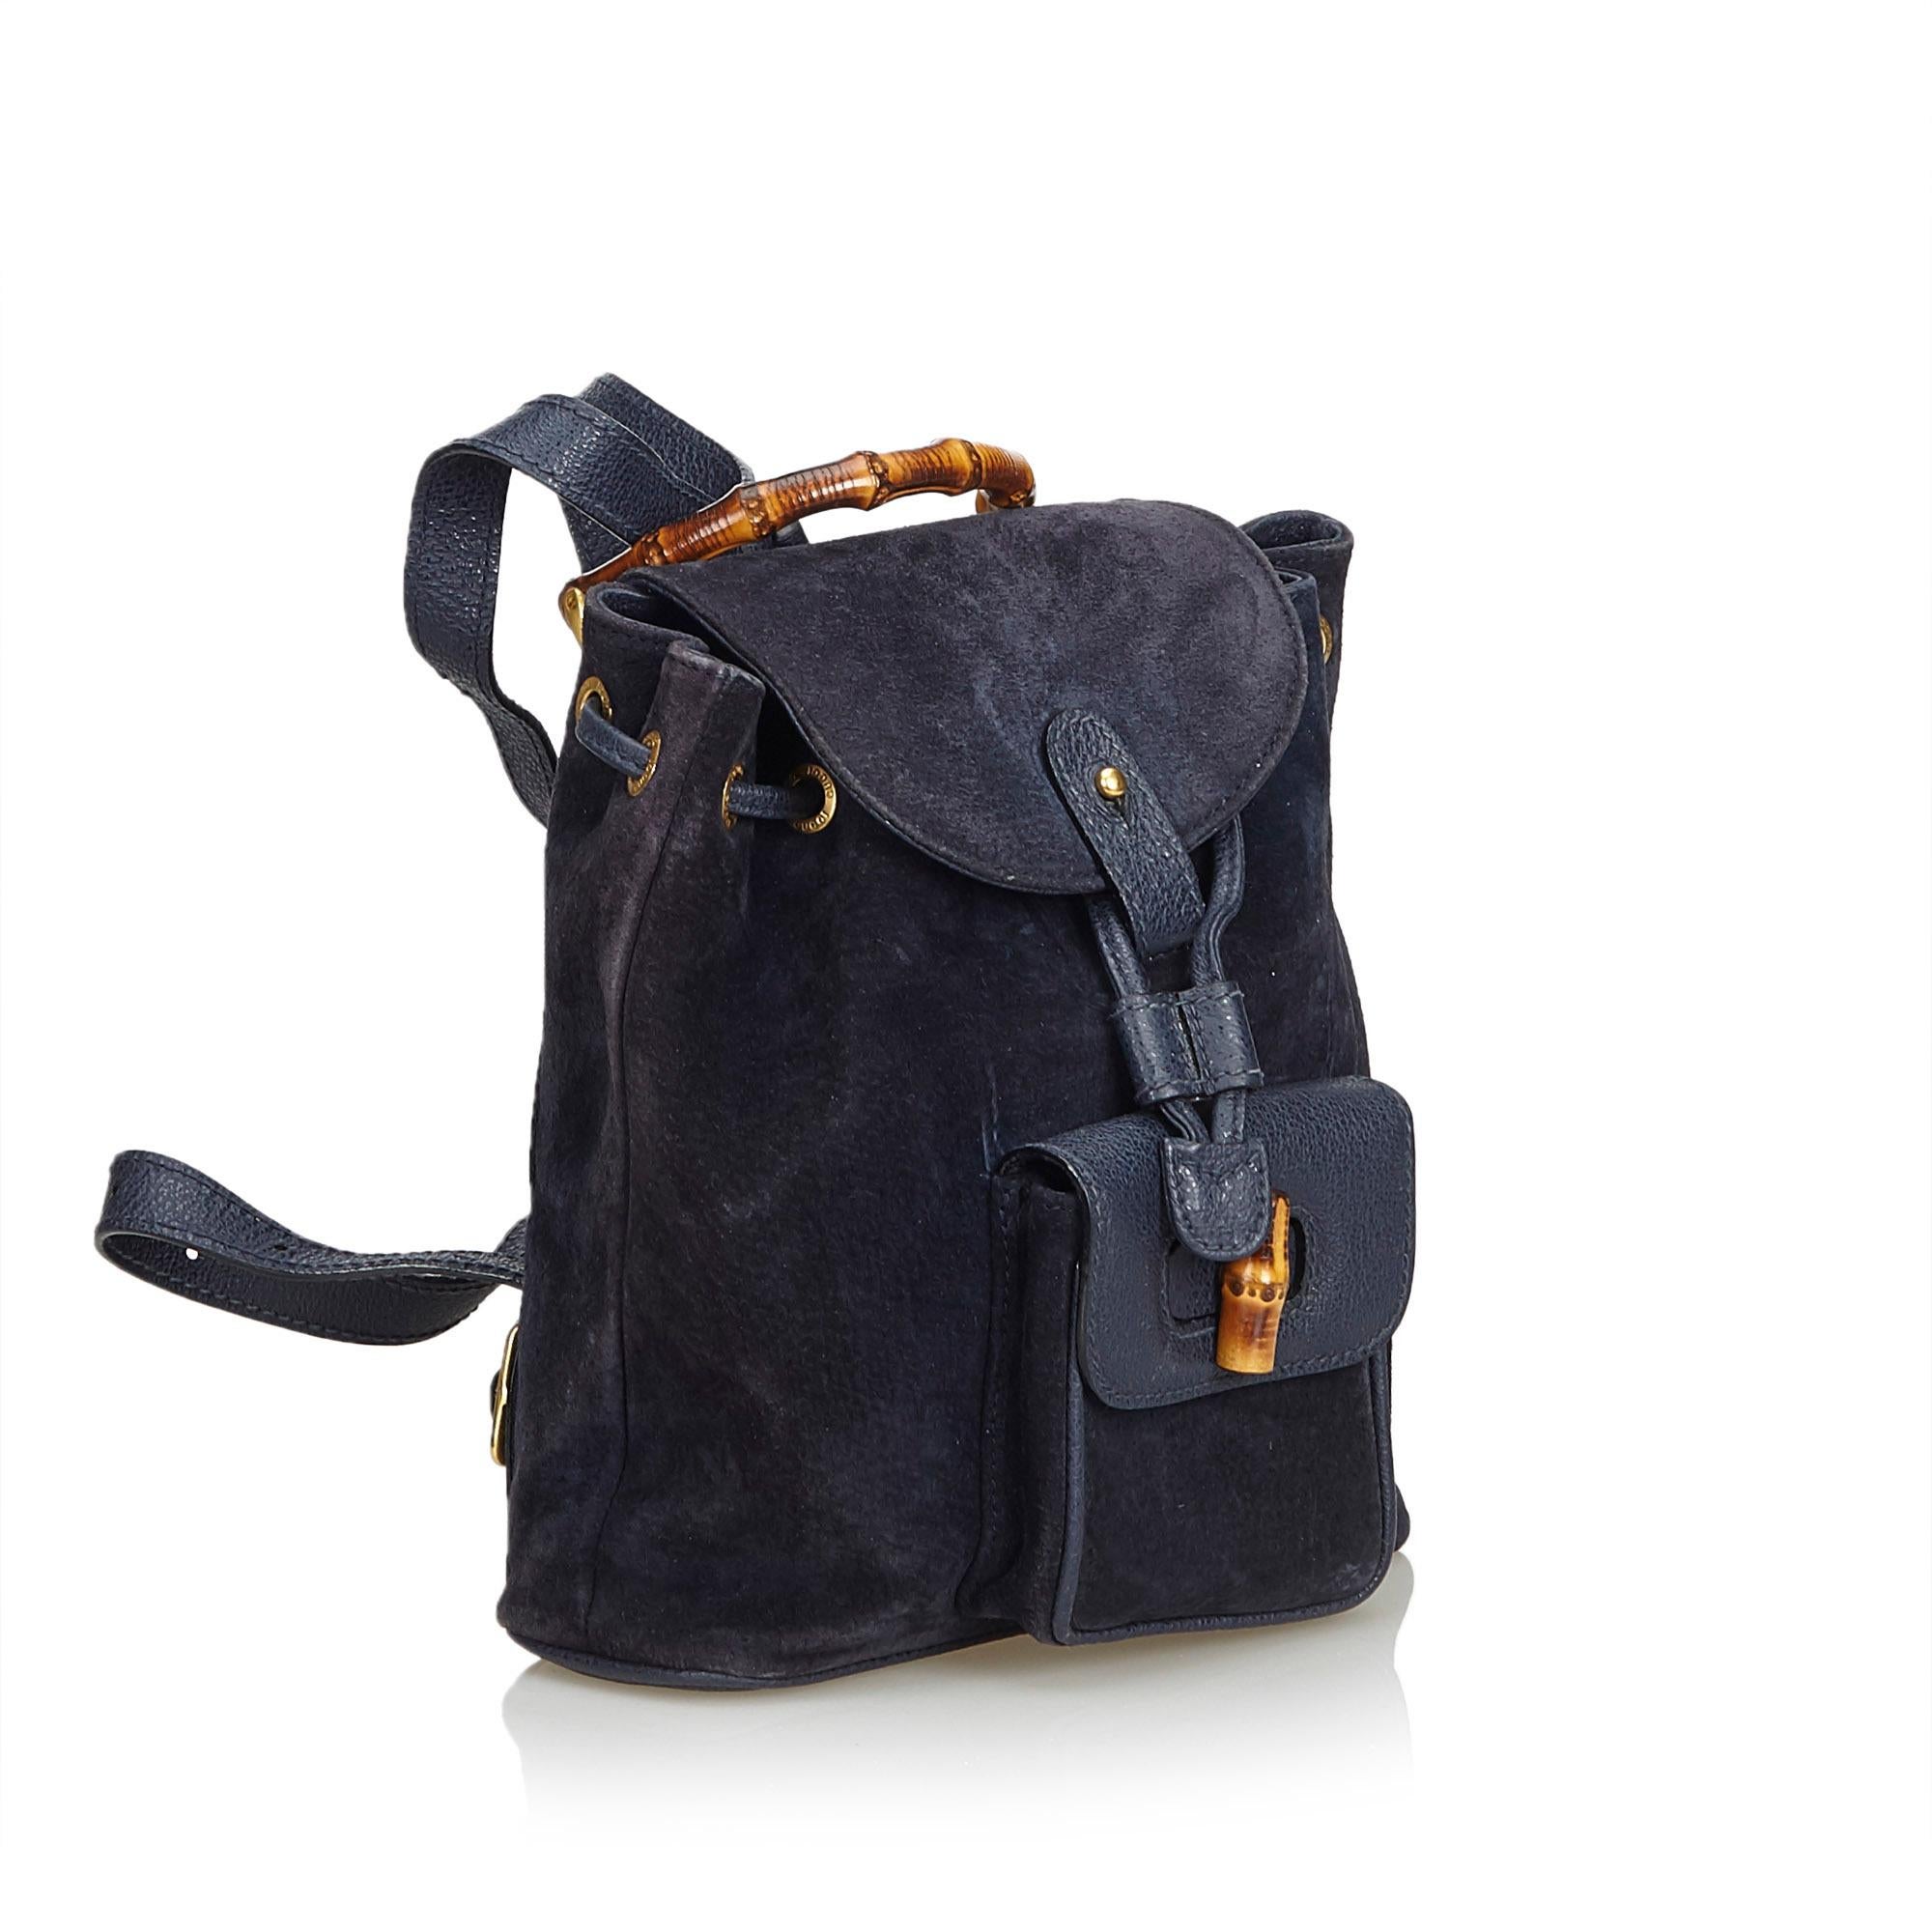 This backpack features a suede body, flat leather back straps, bamboo top handle, top flap with button closure, drawstring closure, exterior flap pocket with bamboo twist lock closure, and an interior zip pocket. It carries as B+ condition